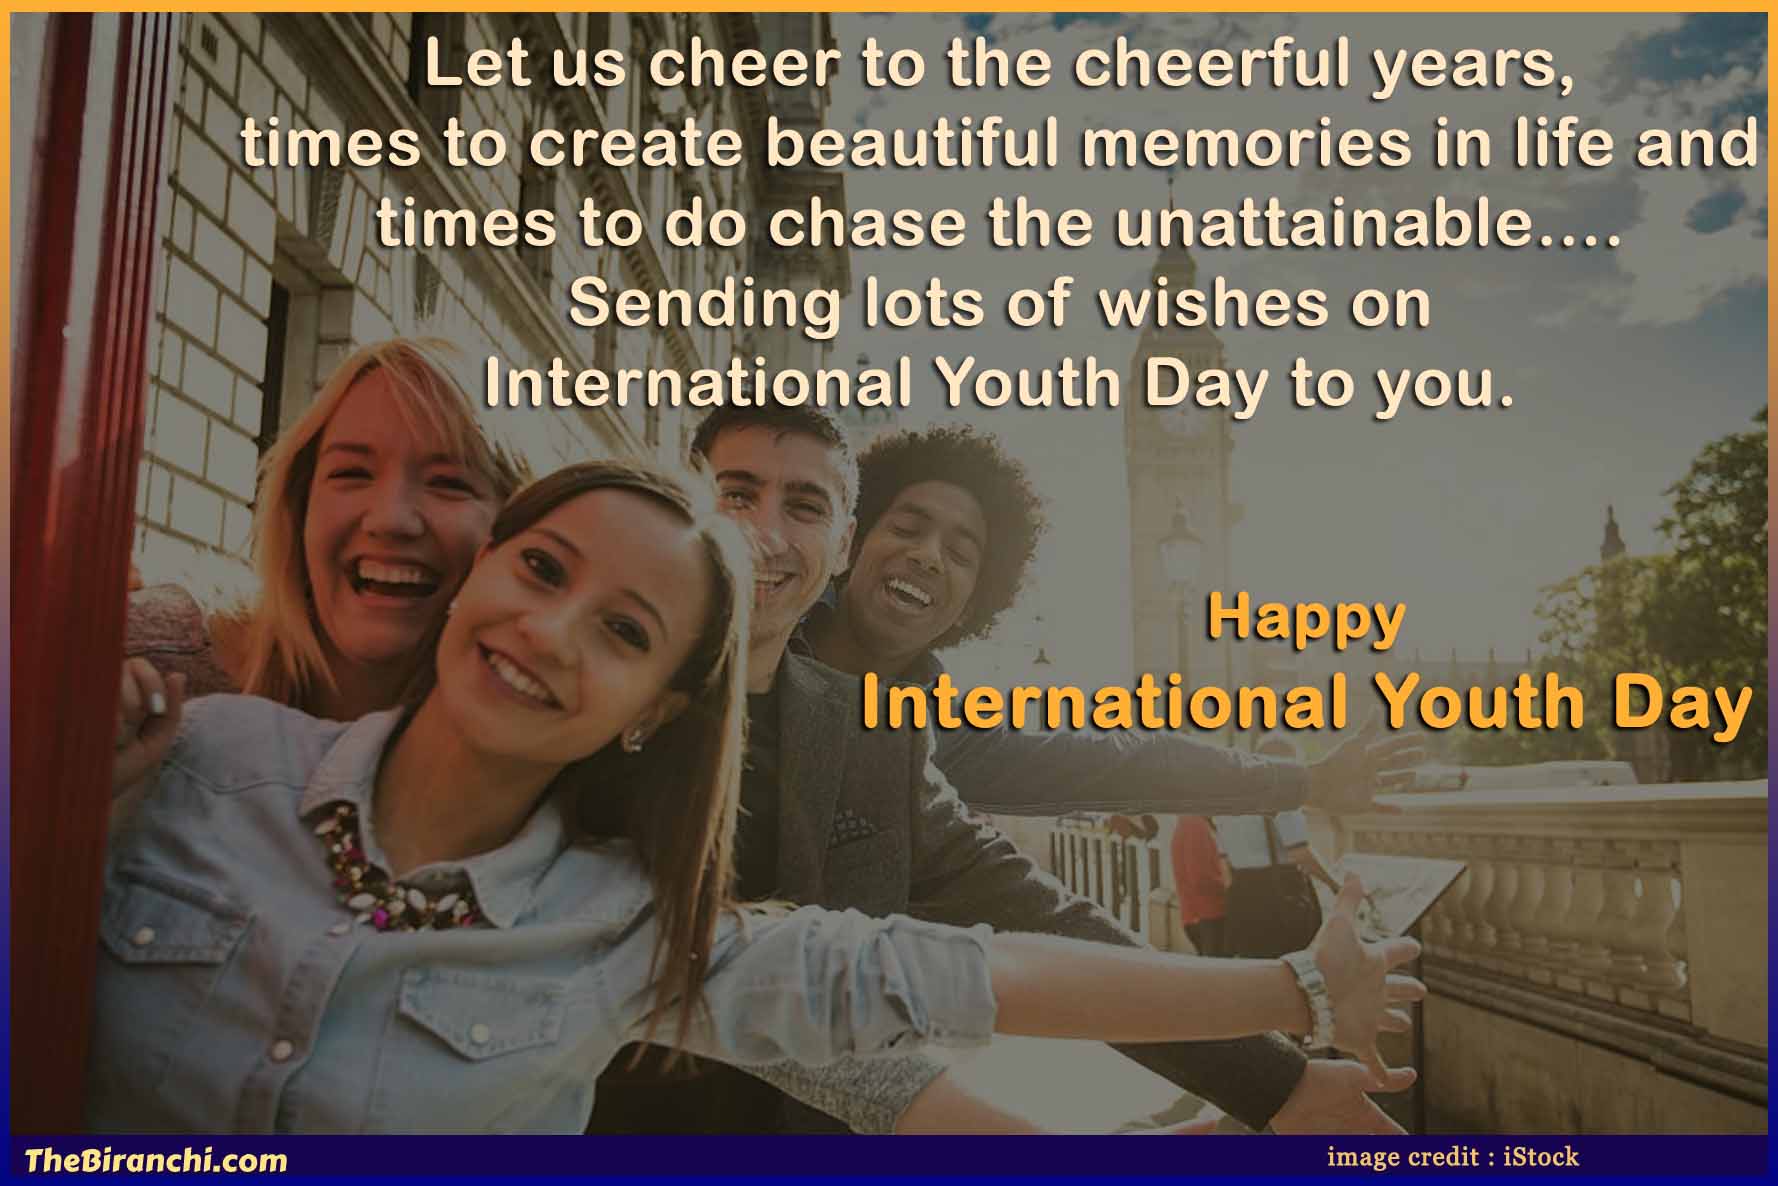 let-us-cheer-International-Youth-Day-Quotes-Wishes-Greetings-Messages